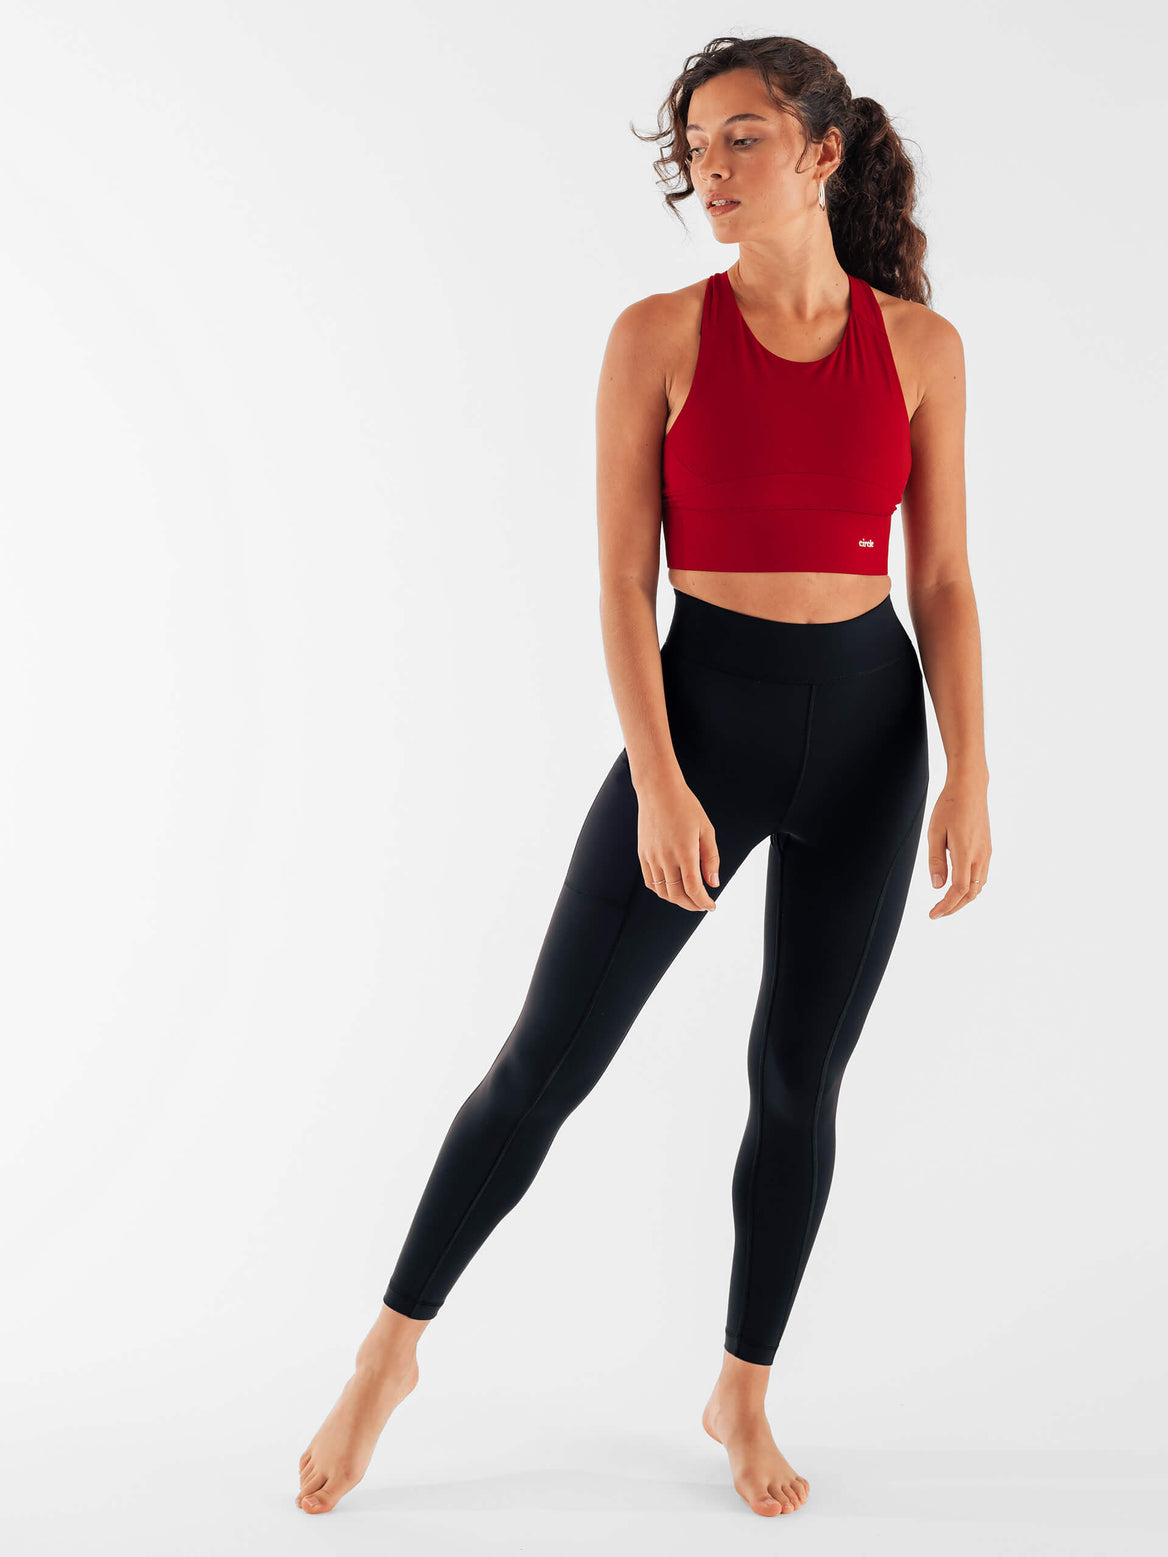 Get in Shape Leggings  Running & Yoga Leggings - Recycled and  recyclable – Circle Sportswear